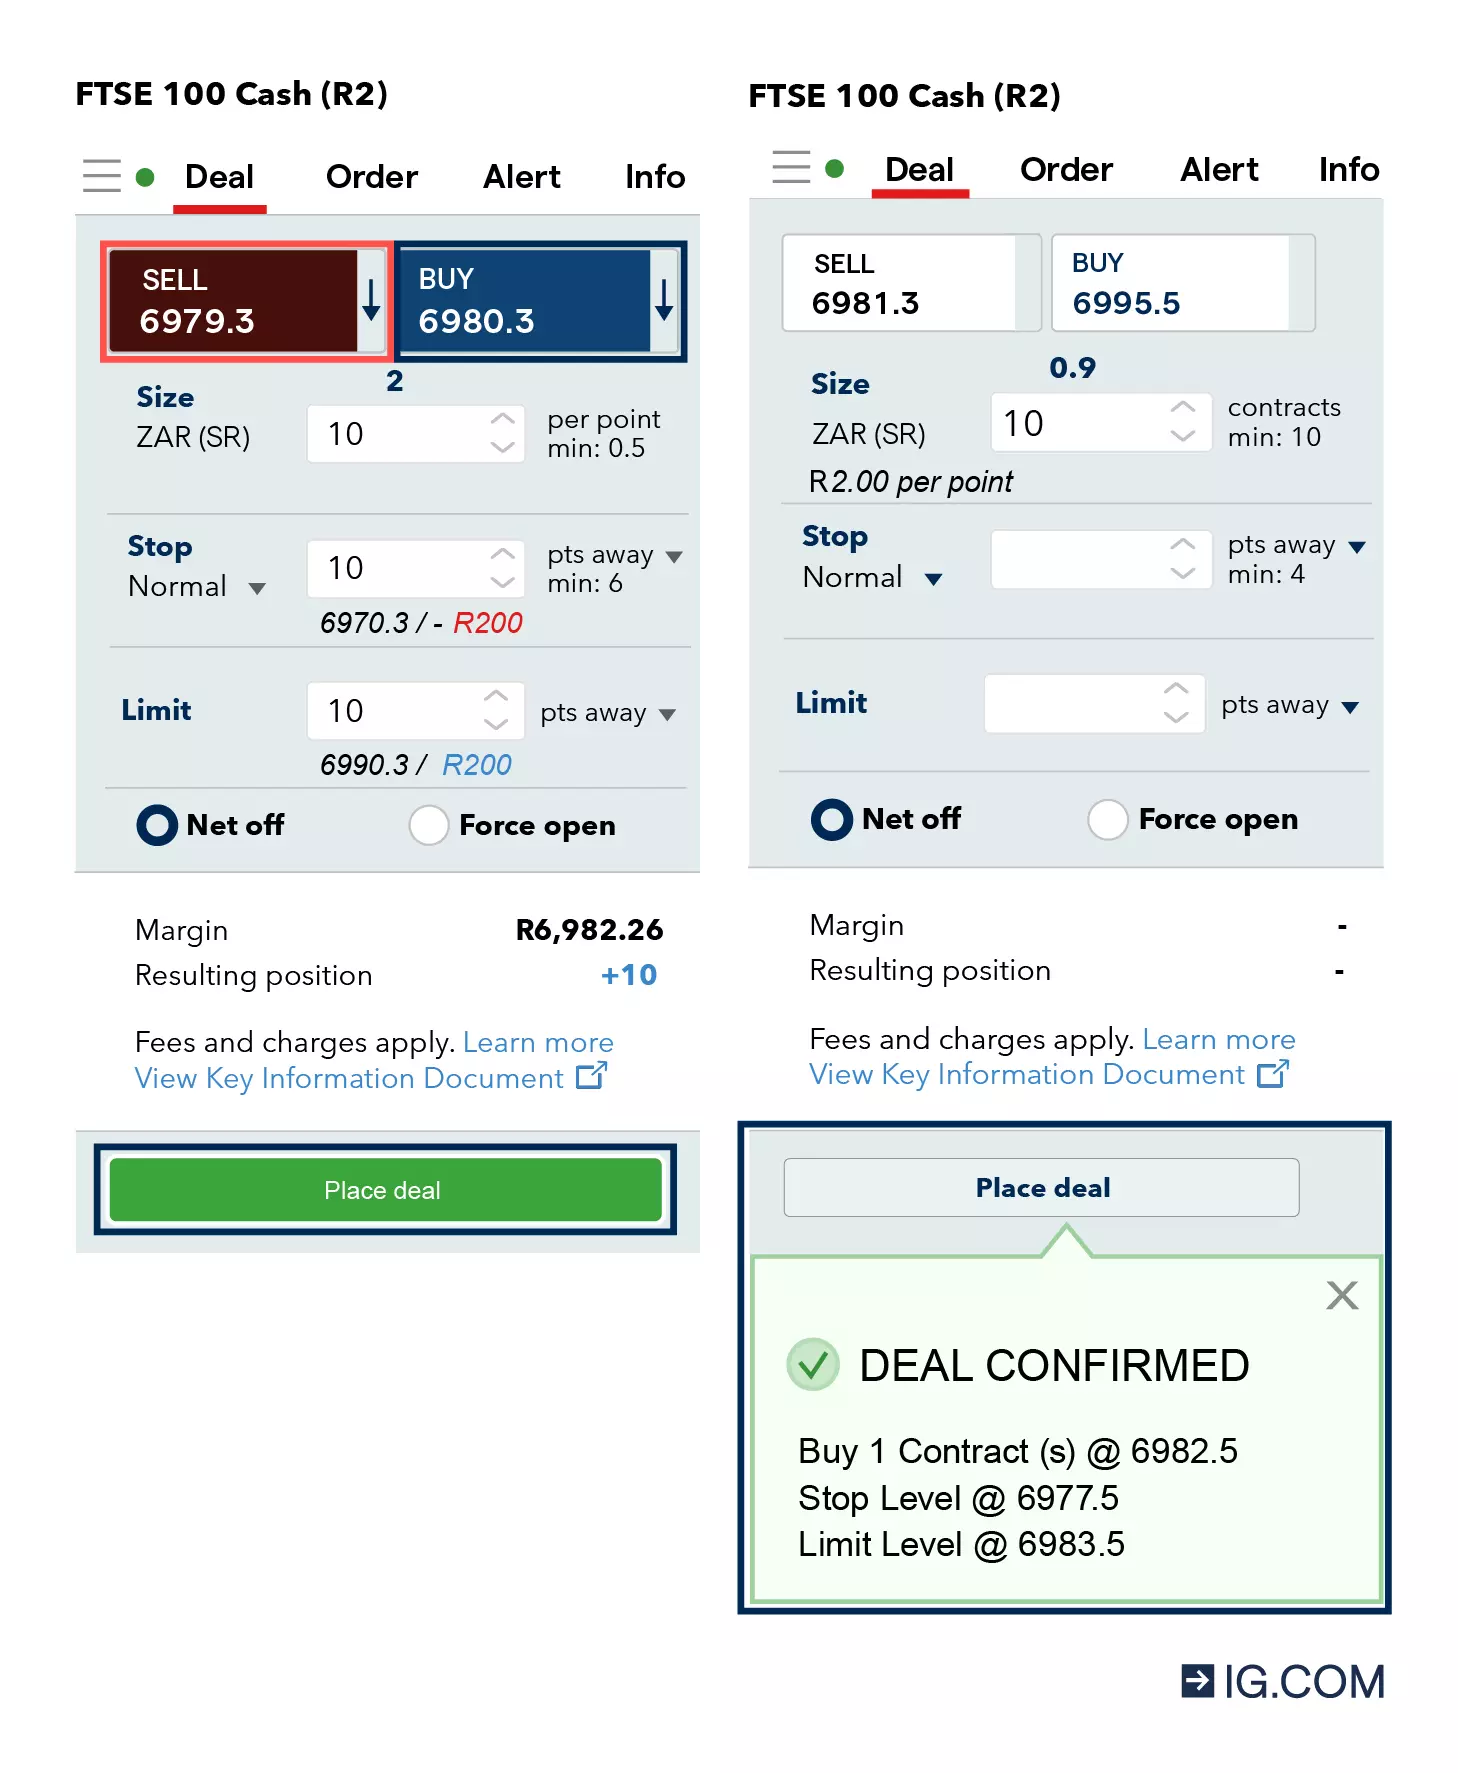 A screenshot of the deal ticket on the IG trading platform that shows how to place a deal and what it looks like when the deal is confirmed.